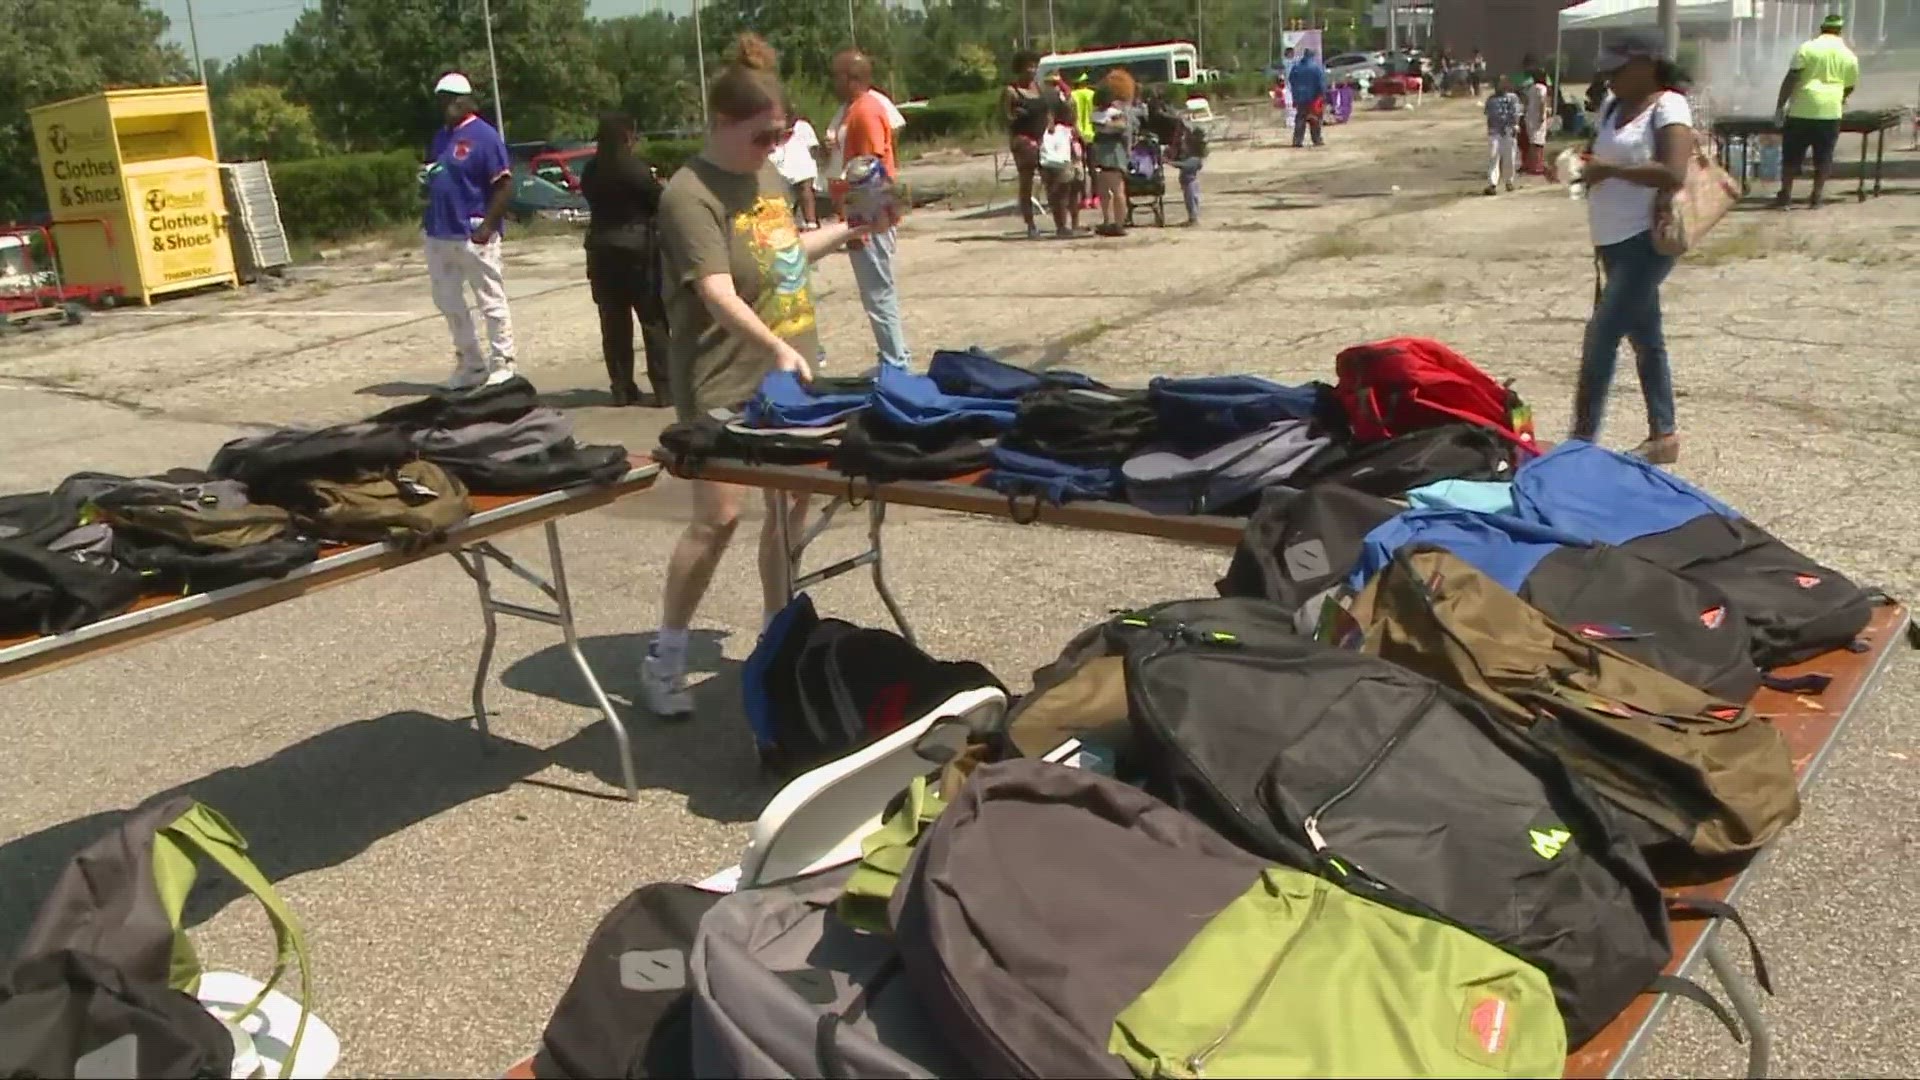 An organization called Buckeye Thrives held a back-to-school celebration recently. WKYC’s Kaitor Kay was there to hand out books and backpacks.